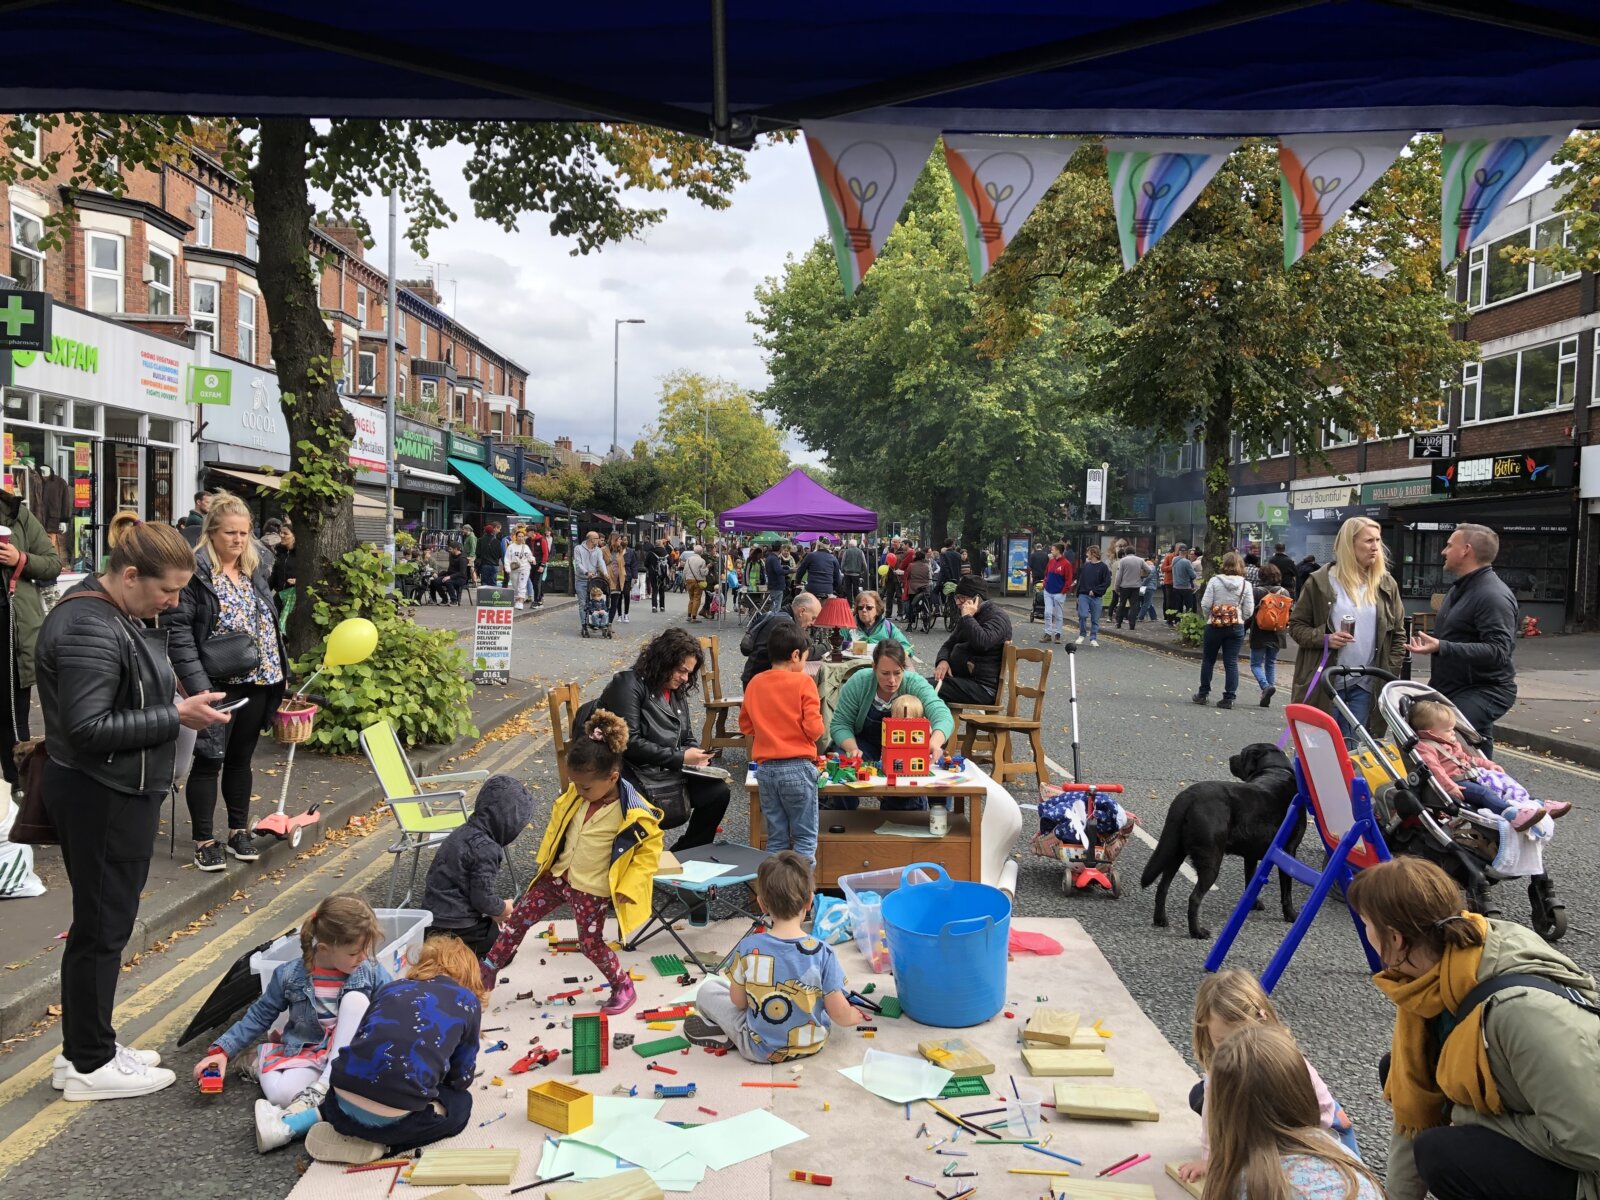 A street scene from the Chorlton Great Get Together children playing with lego instead of breathing in traffic fumes